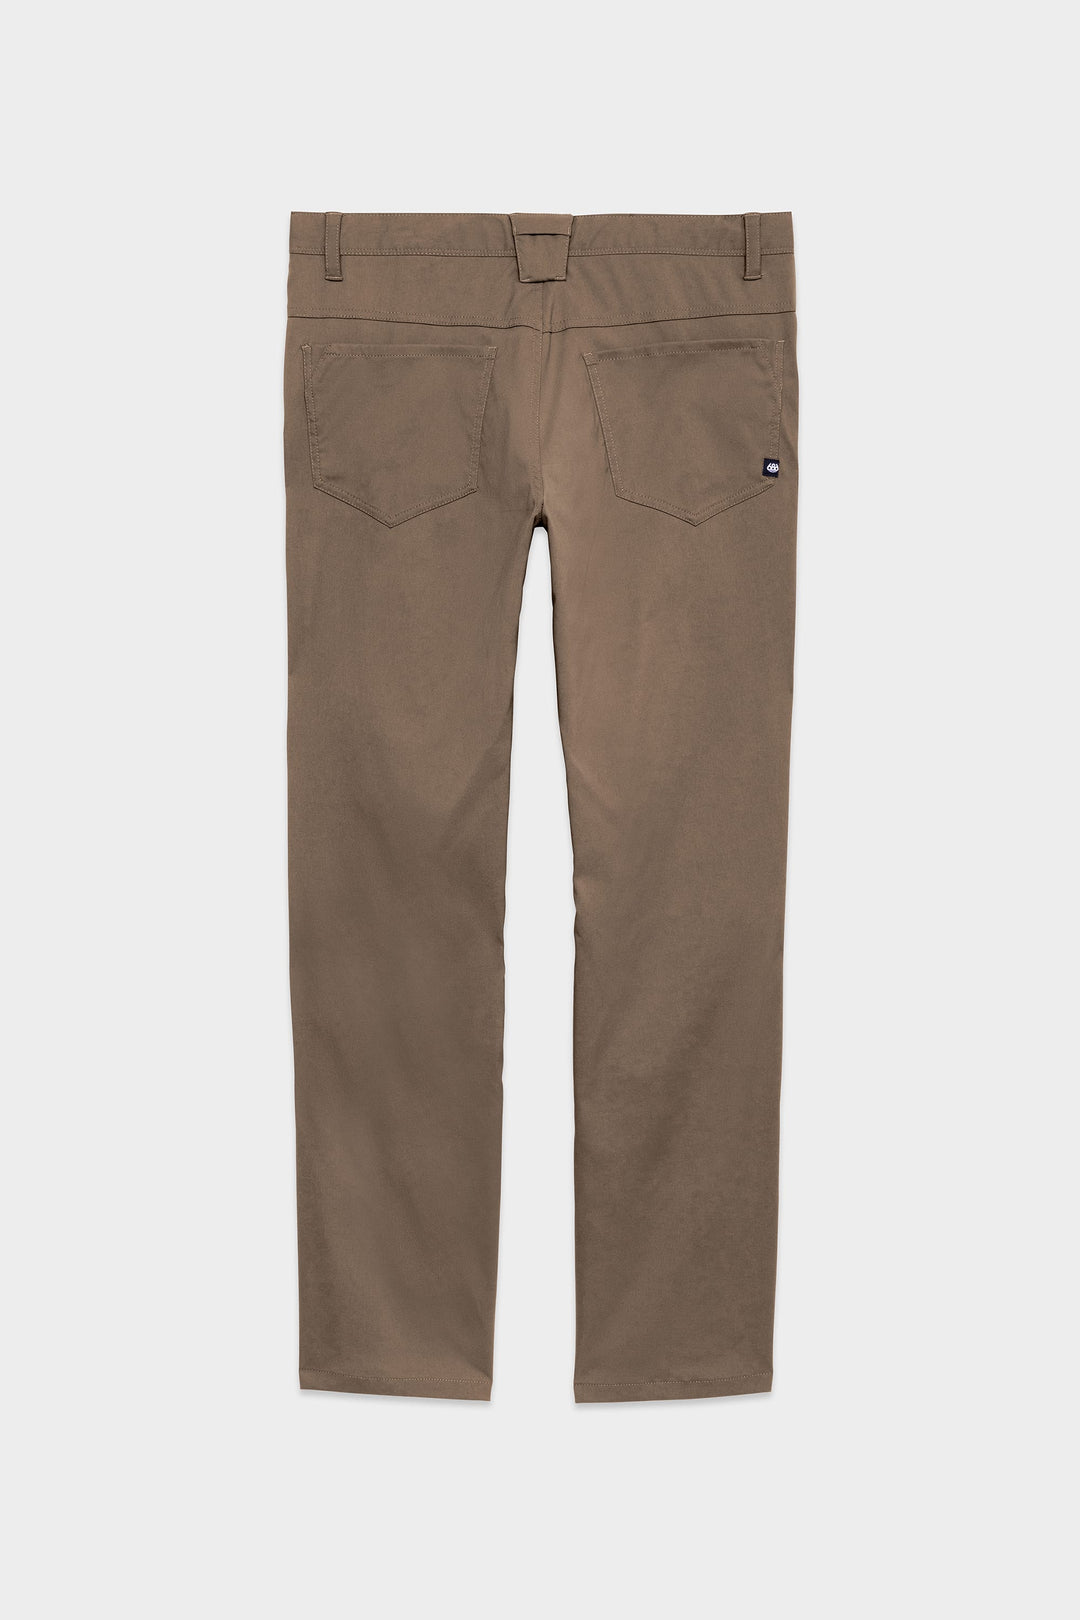 686 Everywhere Pant - Relaxed Fit - Tobacco - Sun Diego Boardshop